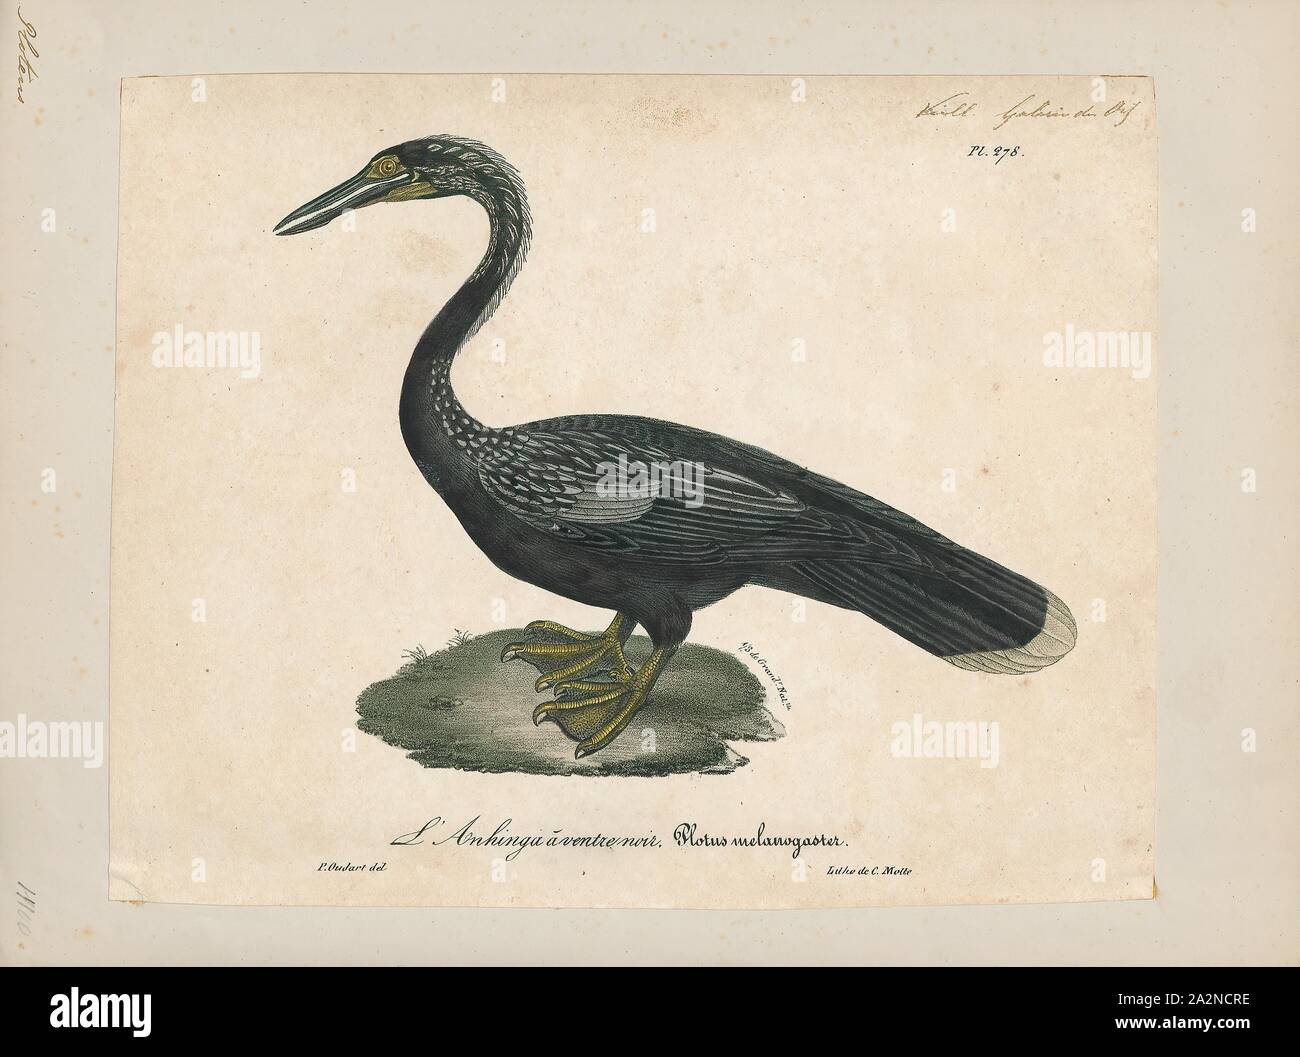 Plotus melanogaster, Print, The Oriental darter or Indian darter (Anhinga melanogaster) is a water bird of tropical South Asia and Southeast Asia. It has a long and slender neck with a straight, pointed bill and, like the cormorant, it hunts for fish while its body is submerged in water. It spears a fish underwater, bringing it above the surface, tossing and juggling it before swallowing the fish head first. The body remains submerged as it swims, and the slender neck alone is visible above the water, which accounts for the colloquial name of snakebird. Like the cormorants, it has wettable Stock Photo